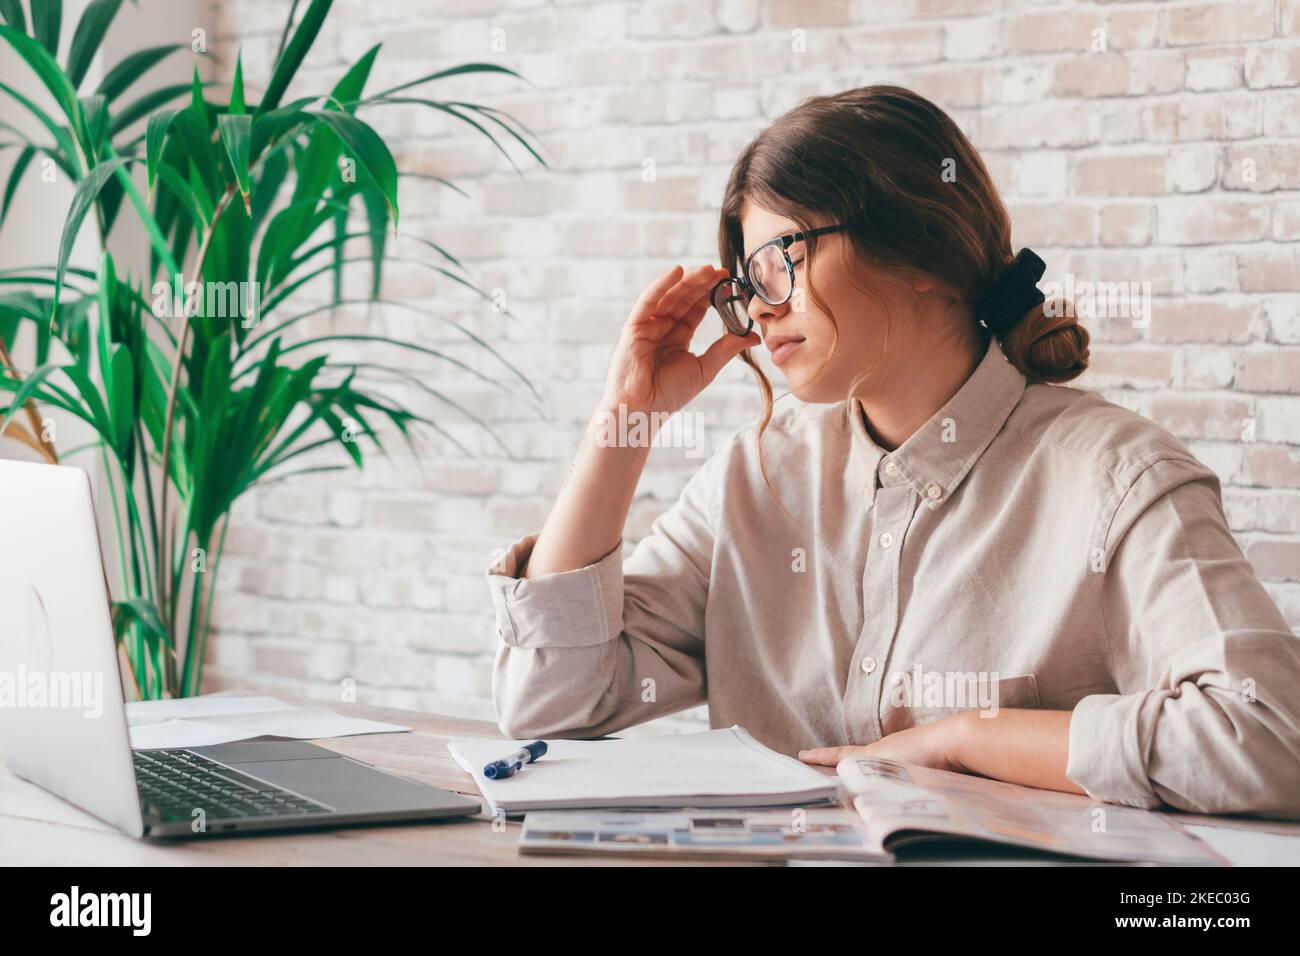 Tired bored teenage girl school student feeling headache or fatigue doing homework at home. Exhausted depressed sick teenagertaking off glasses worried about difficult education problems concept. Stock Photo